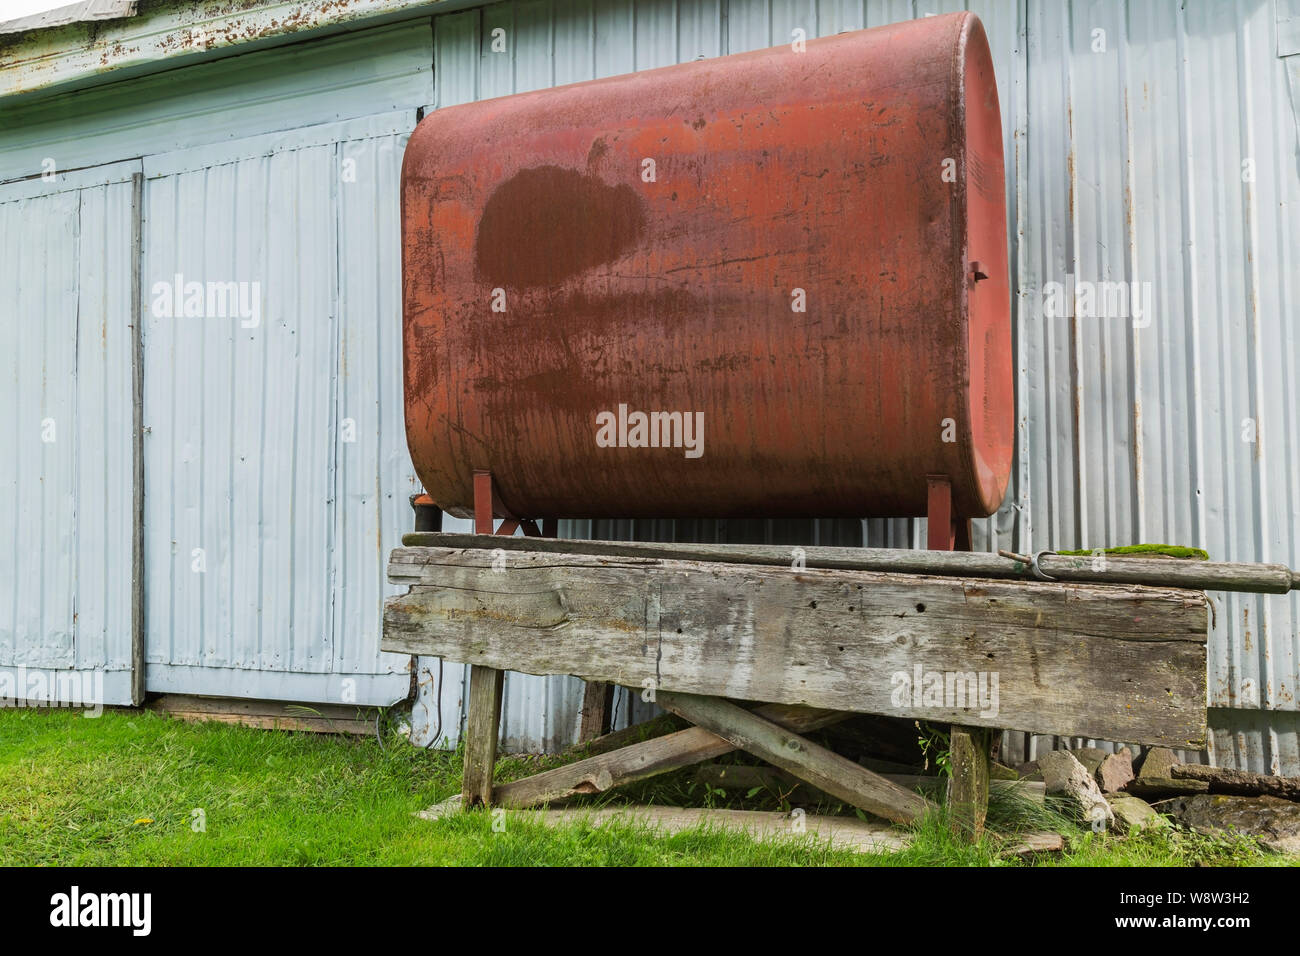 Red painted heating oil tank on old elevated wooden platform next to corrugated sheet metal cladded building in residential backyard Stock Photo